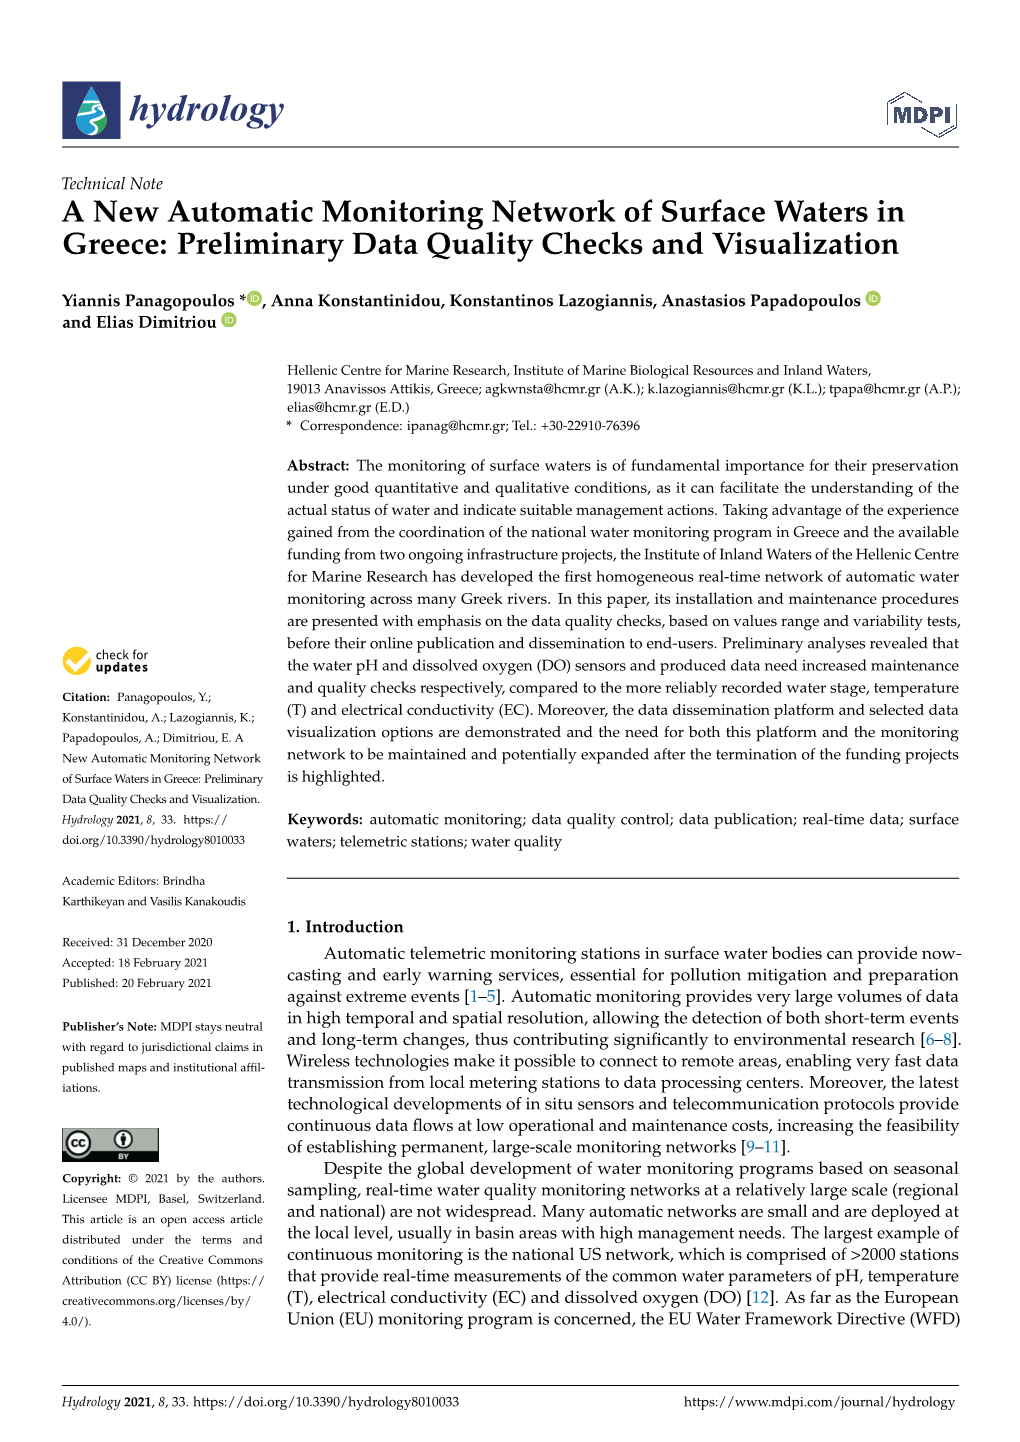 A New Automatic Monitoring Network of Surface Waters in Greece: Preliminary Data Quality Checks and Visualization